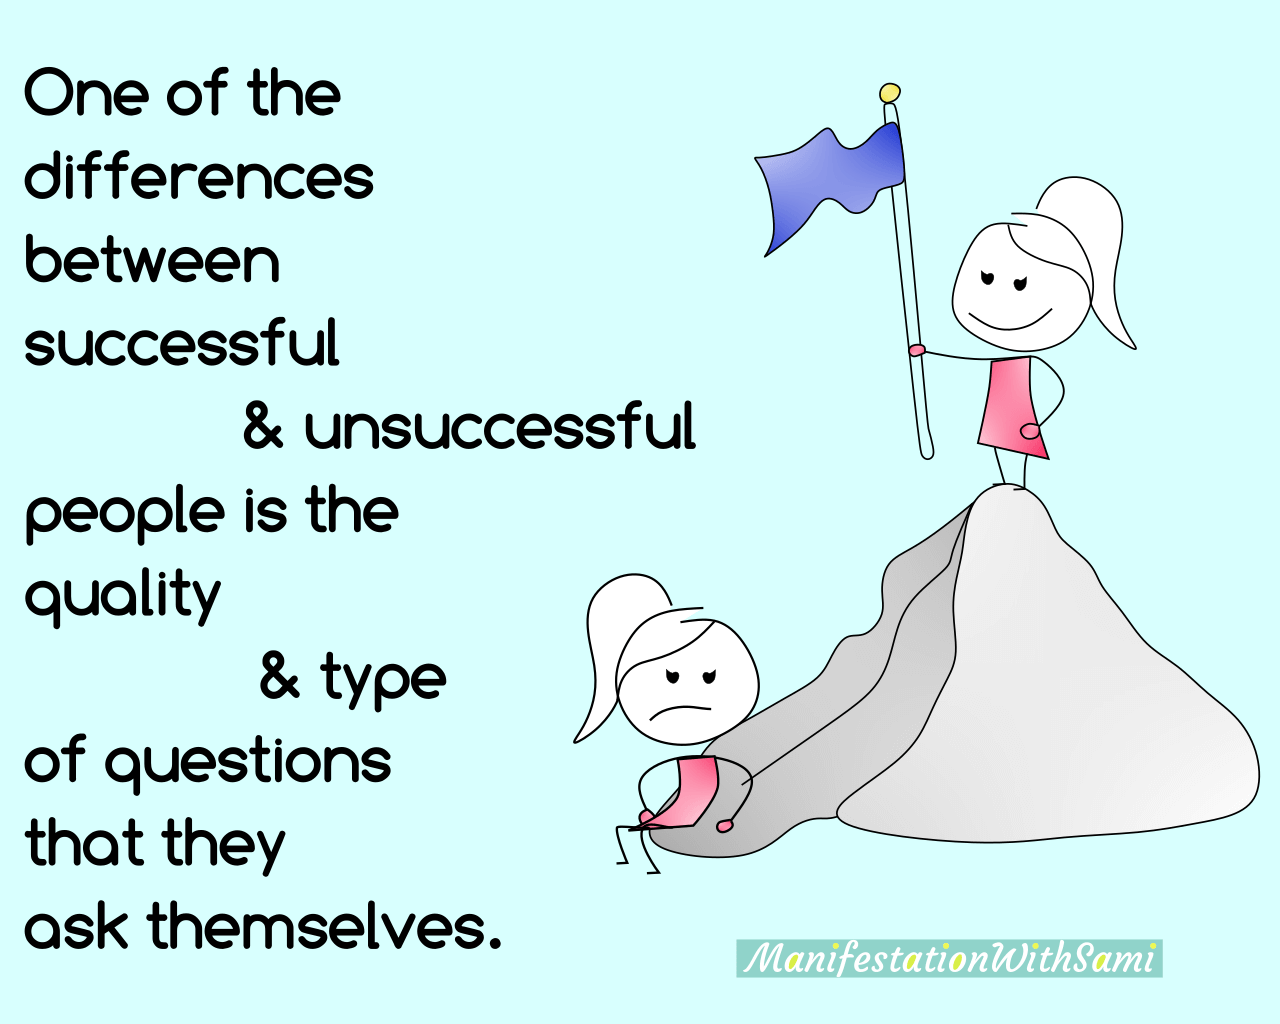 The type and quality of questions that you ask from your subconscious mind determine your success.